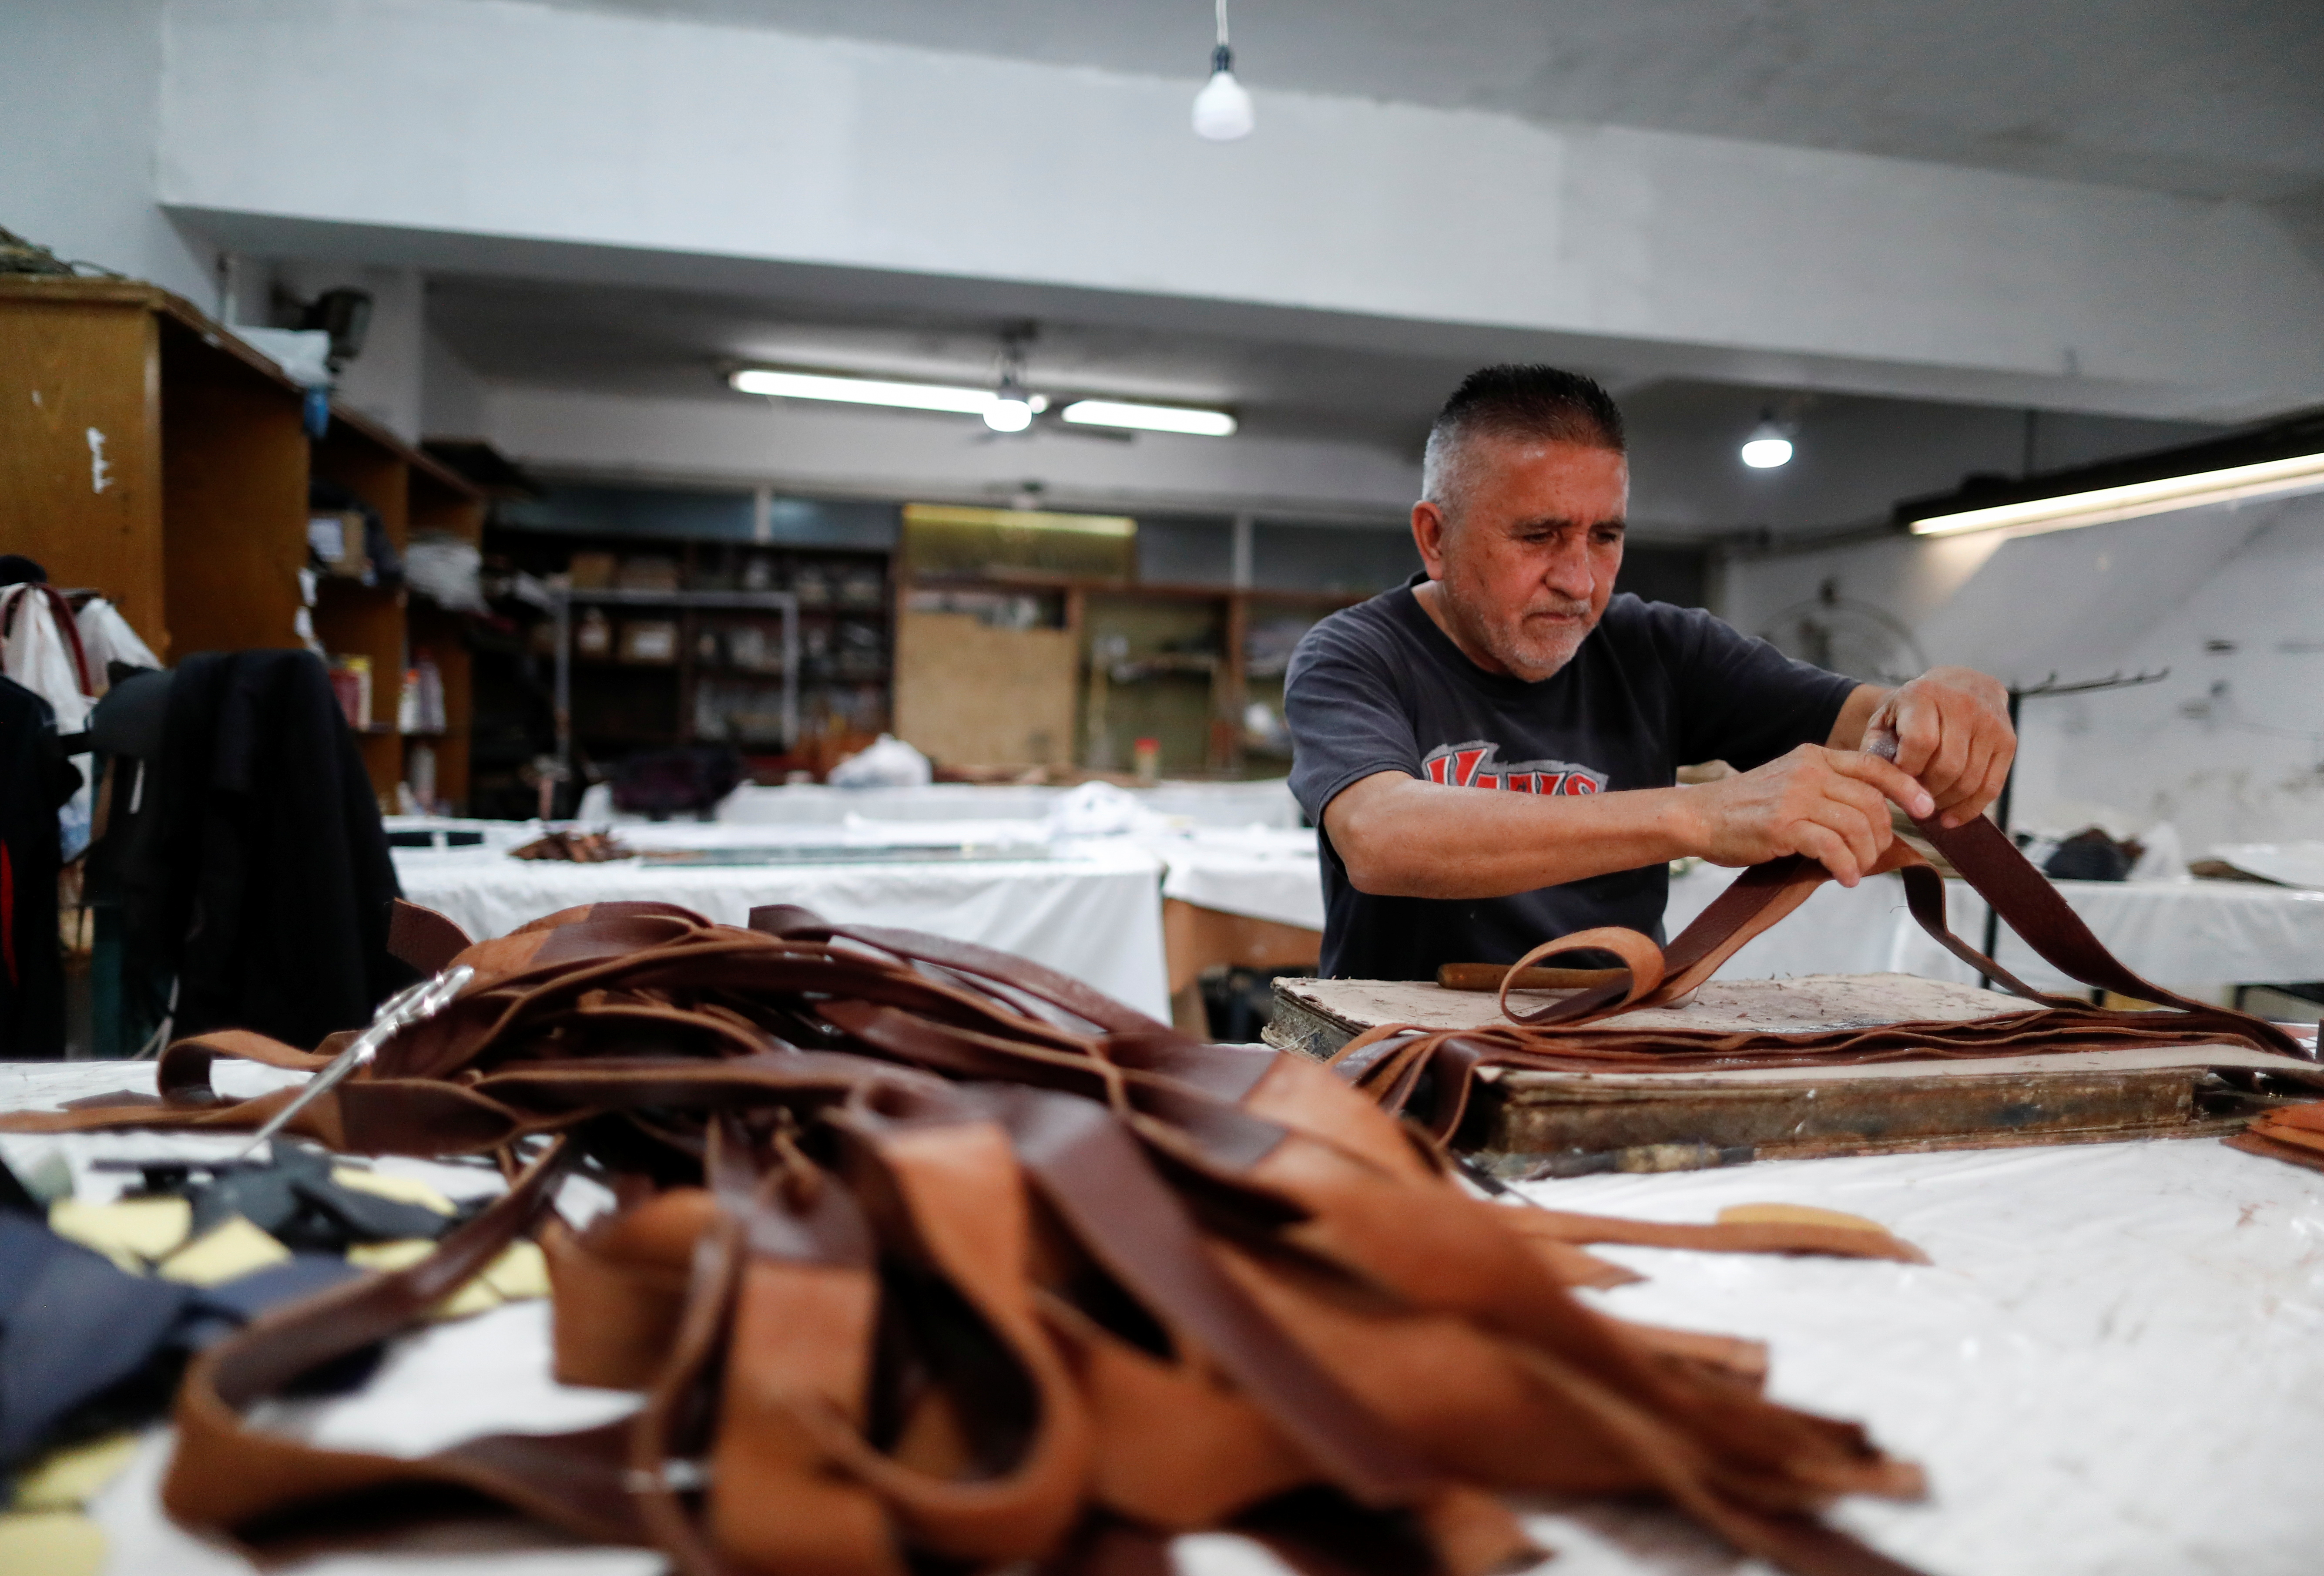 Hugo, a member of the Renacer cooperative works with plastic waste-leather for the fashion firm Fracking Design making sandals, in Buenos Aires, Argentina November 24, 2021. Picture taken November 24, 2021. REUTERS/Agustin Marcarian